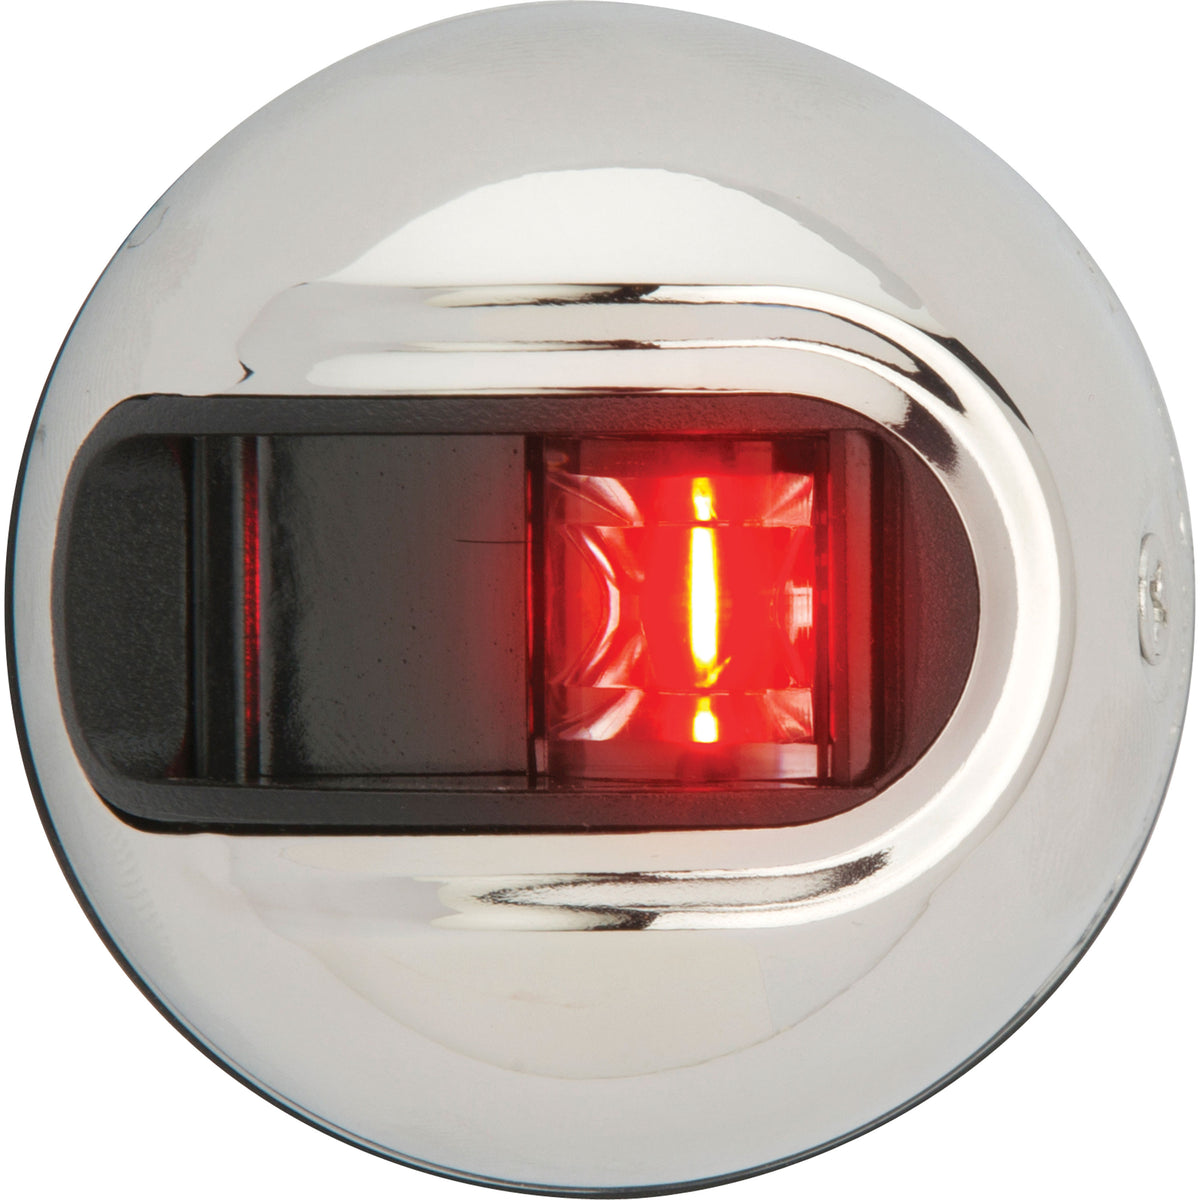 Attwood NV3012SSR-7 Sidelights Vertical - Port, Red/Stainless